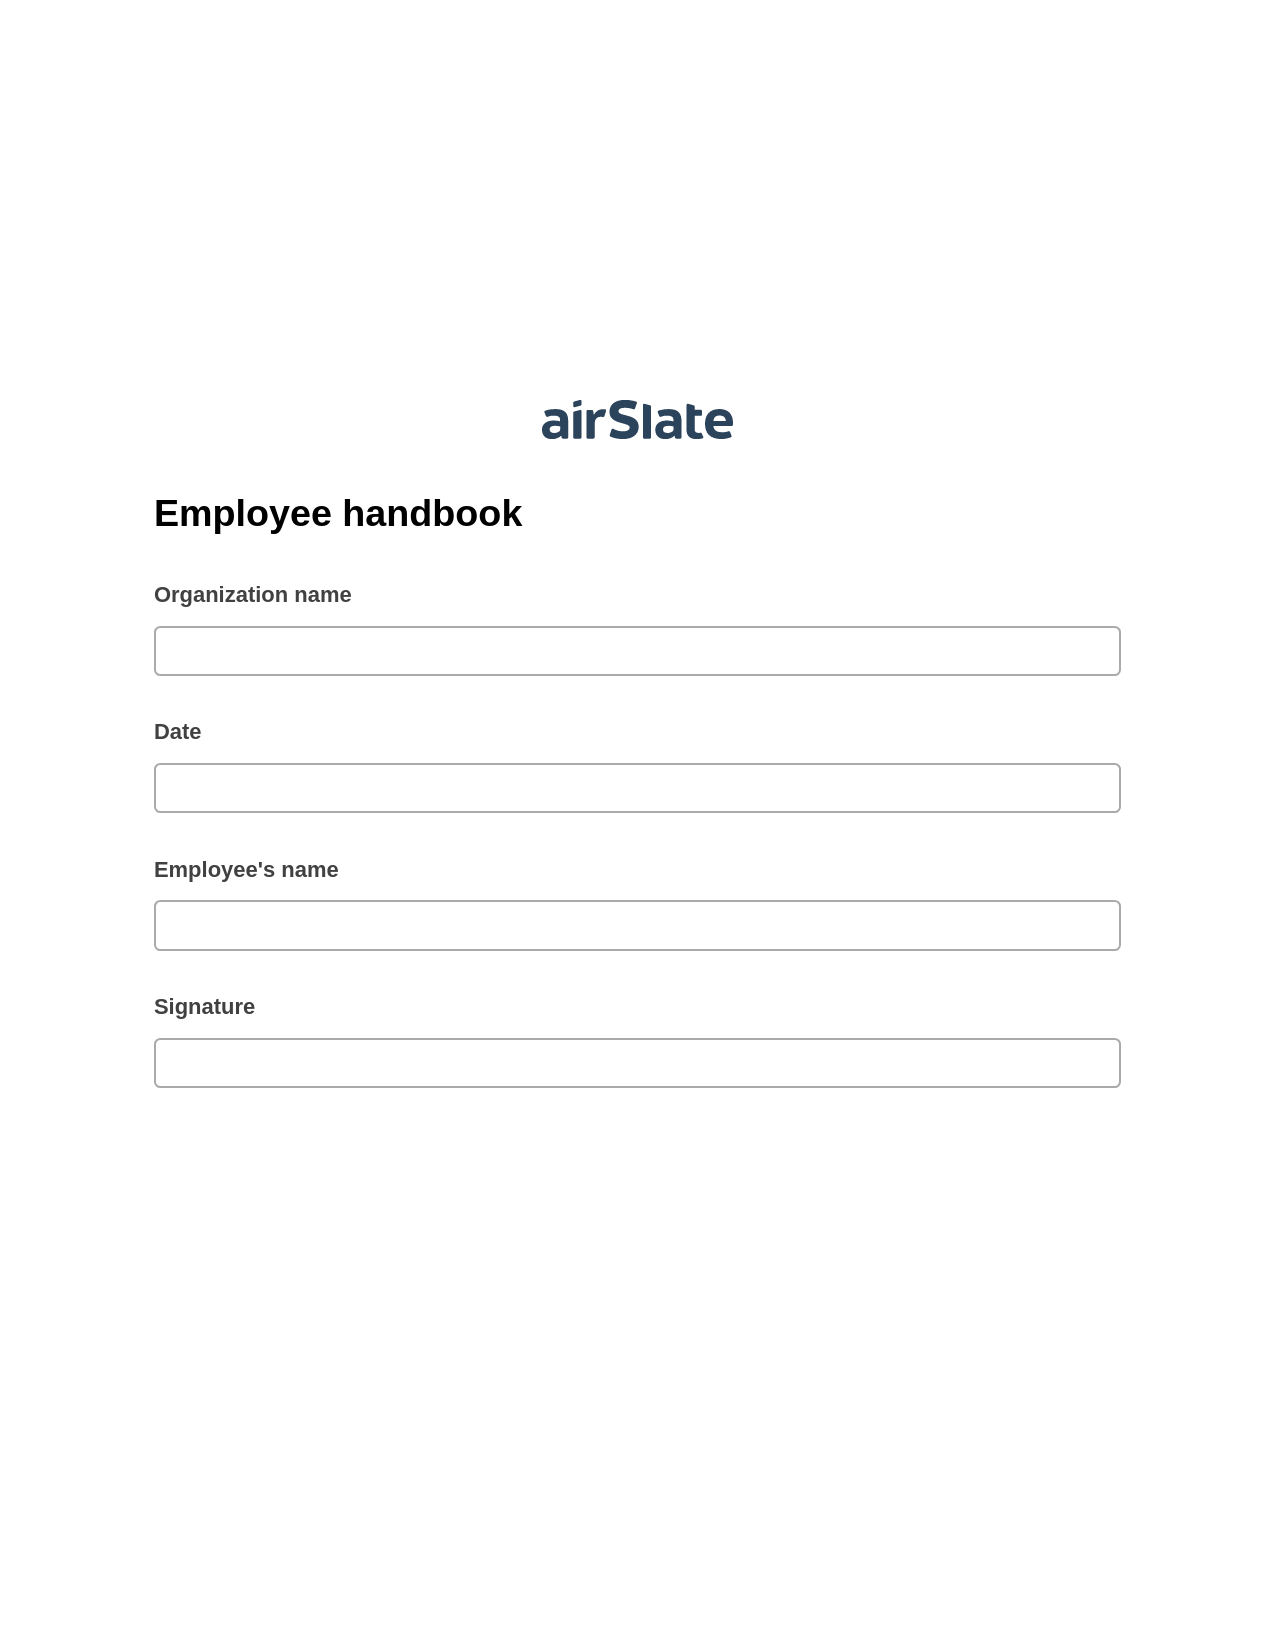 Multirole Employee handbook Pre-fill Dropdown from Airtable, Create Salesforce Record Bot, Export to NetSuite Record Bot